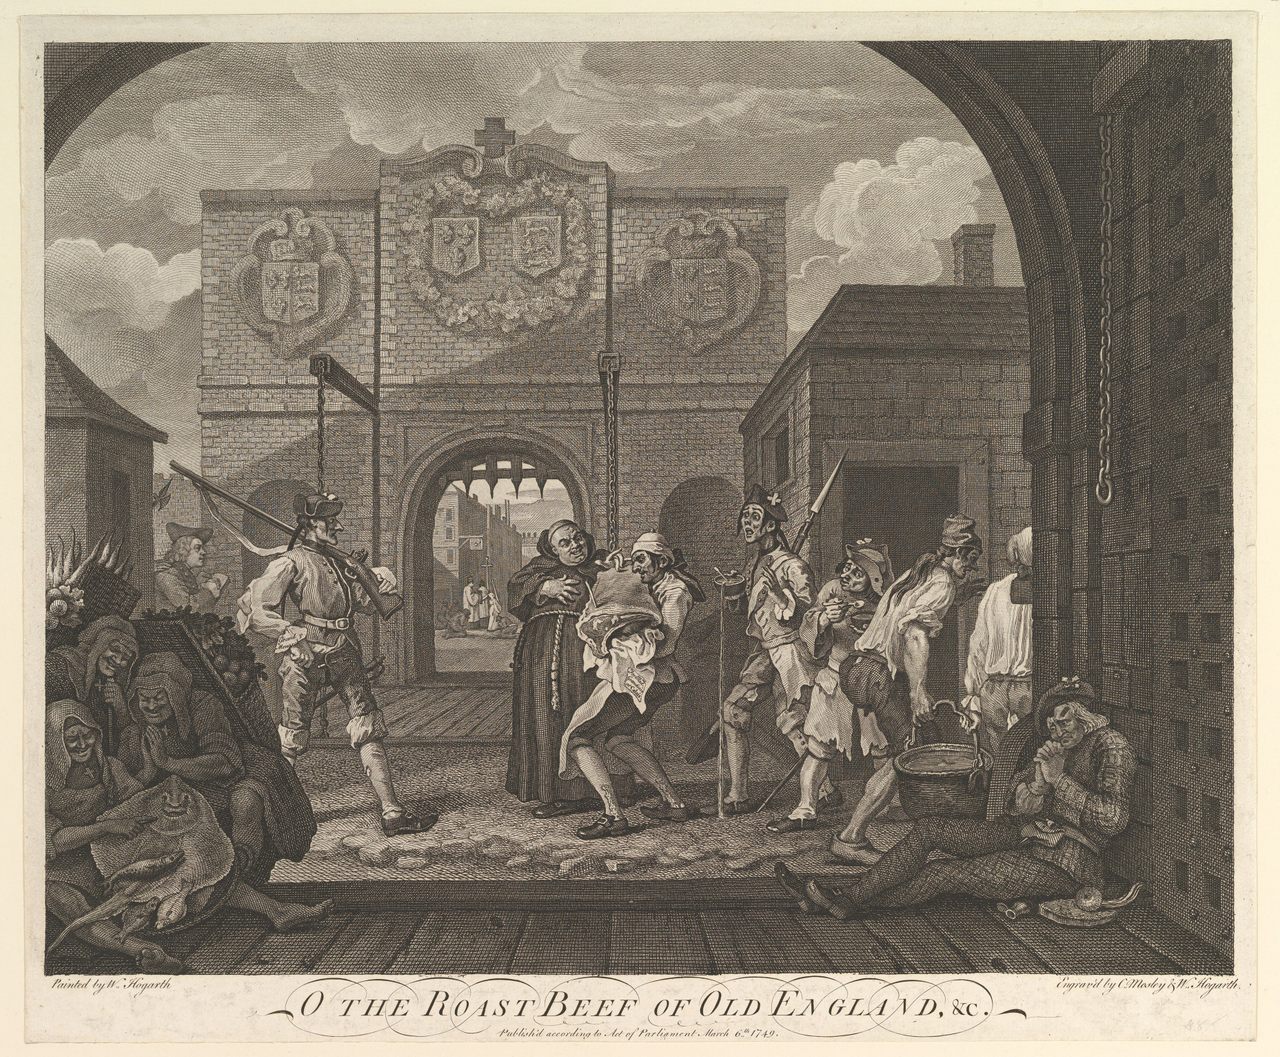 Hogarth's "O the Roast Beef of Old England (The Gate of Calais)" captured his sentiments as a society member.